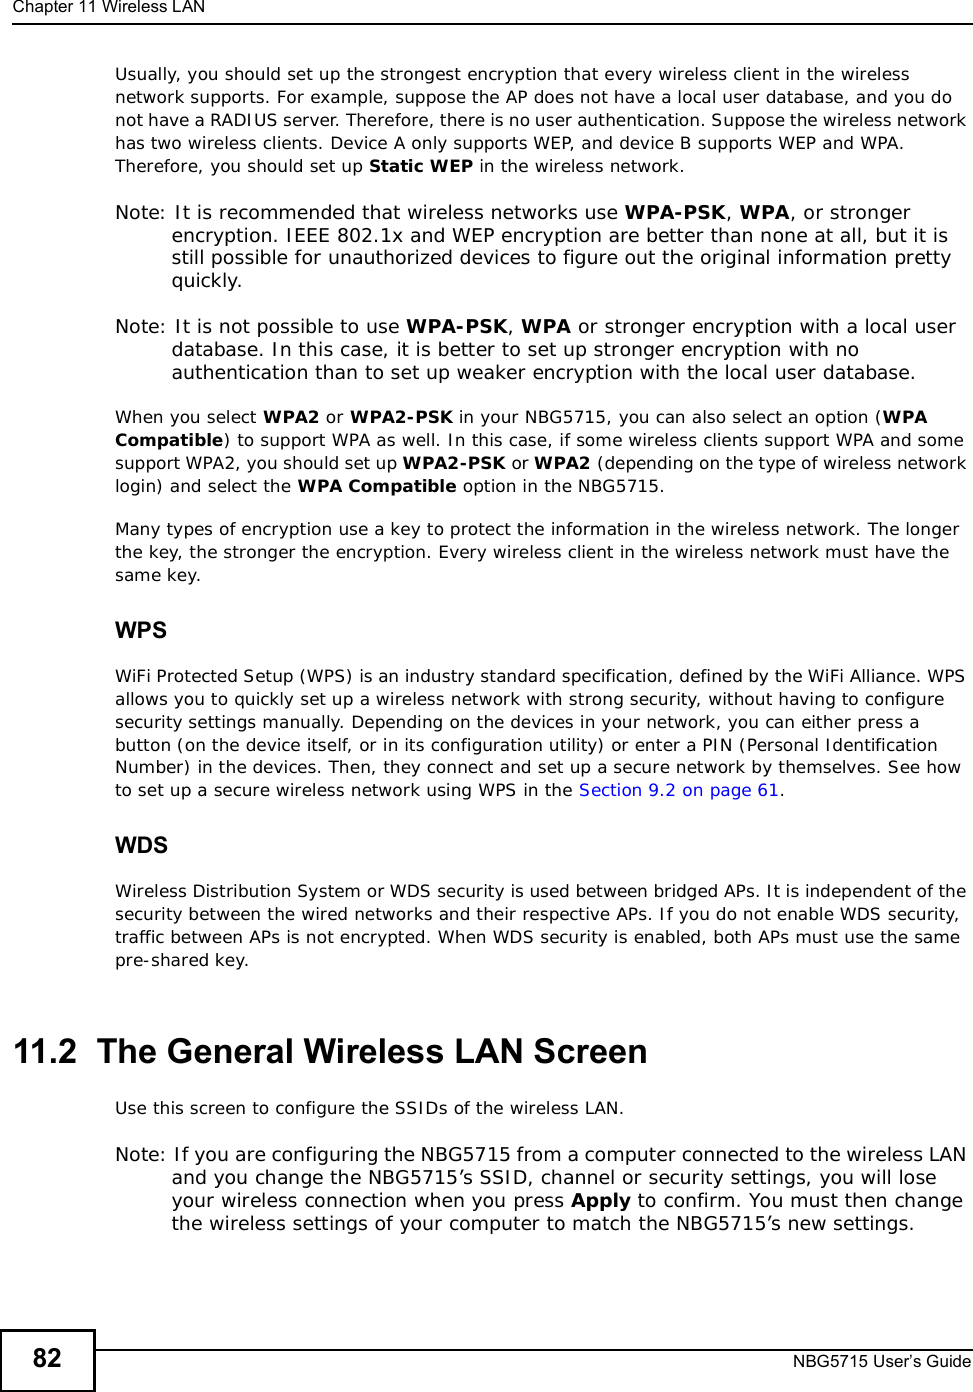 Chapter 11Wireless LANNBG5715 User’s Guide82Usually, you should set up the strongest encryption that every wireless client in the wireless network supports. For example, suppose the AP does not have a local user database, and you do not have a RADIUS server. Therefore, there is no user authentication. Suppose the wireless network has two wireless clients. Device A only supports WEP, and device B supports WEP and WPA. Therefore, you should set up Static WEP in the wireless network.Note: It is recommended that wireless networks use WPA-PSK,WPA, or stronger encryption. IEEE 802.1x and WEP encryption are better than none at all, but it is still possible for unauthorized devices to figure out the original information pretty quickly.Note: It is not possible to use WPA-PSK,WPA or stronger encryption with a local user database. In this case, it is better to set up stronger encryption with no authentication than to set up weaker encryption with the local user database.When you select WPA2 or WPA2-PSK in your NBG5715, you can also select an option (WPACompatible) to support WPA as well. In this case, if some wireless clients support WPA and some support WPA2, you should set up WPA2-PSK or WPA2 (depending on the type of wireless network login) and select the WPA Compatible option in the NBG5715.Many types of encryption use a key to protect the information in the wireless network. The longer the key, the stronger the encryption. Every wireless client in the wireless network must have the same key.WPSWiFi Protected Setup (WPS) is an industry standard specification, defined by the WiFi Alliance. WPS allows you to quickly set up a wireless network with strong security, without having to configure security settings manually. Depending on the devices in your network, you can either press a button (on the device itself, or in its configuration utility) or enter a PIN (Personal Identification Number) in the devices. Then, they connect and set up a secure network by themselves. See how to set up a secure wireless network using WPS in the Section 9.2 on page 61.WDSWireless Distribution System or WDS security is used between bridged APs. It is independent of the security between the wired networks and their respective APs. If you do not enable WDS security, traffic between APs is not encrypted. When WDS security is enabled, both APs must use the same pre-shared key.11.2  The General Wireless LAN Screen Use this screen to configure the SSIDs of the wireless LAN.Note: If you are configuring the NBG5715 from a computer connected to the wireless LAN and you change the NBG5715’s SSID, channel or security settings, you will lose your wireless connection when you press Apply to confirm. You must then change the wireless settings of your computer to match the NBG5715’s new settings.